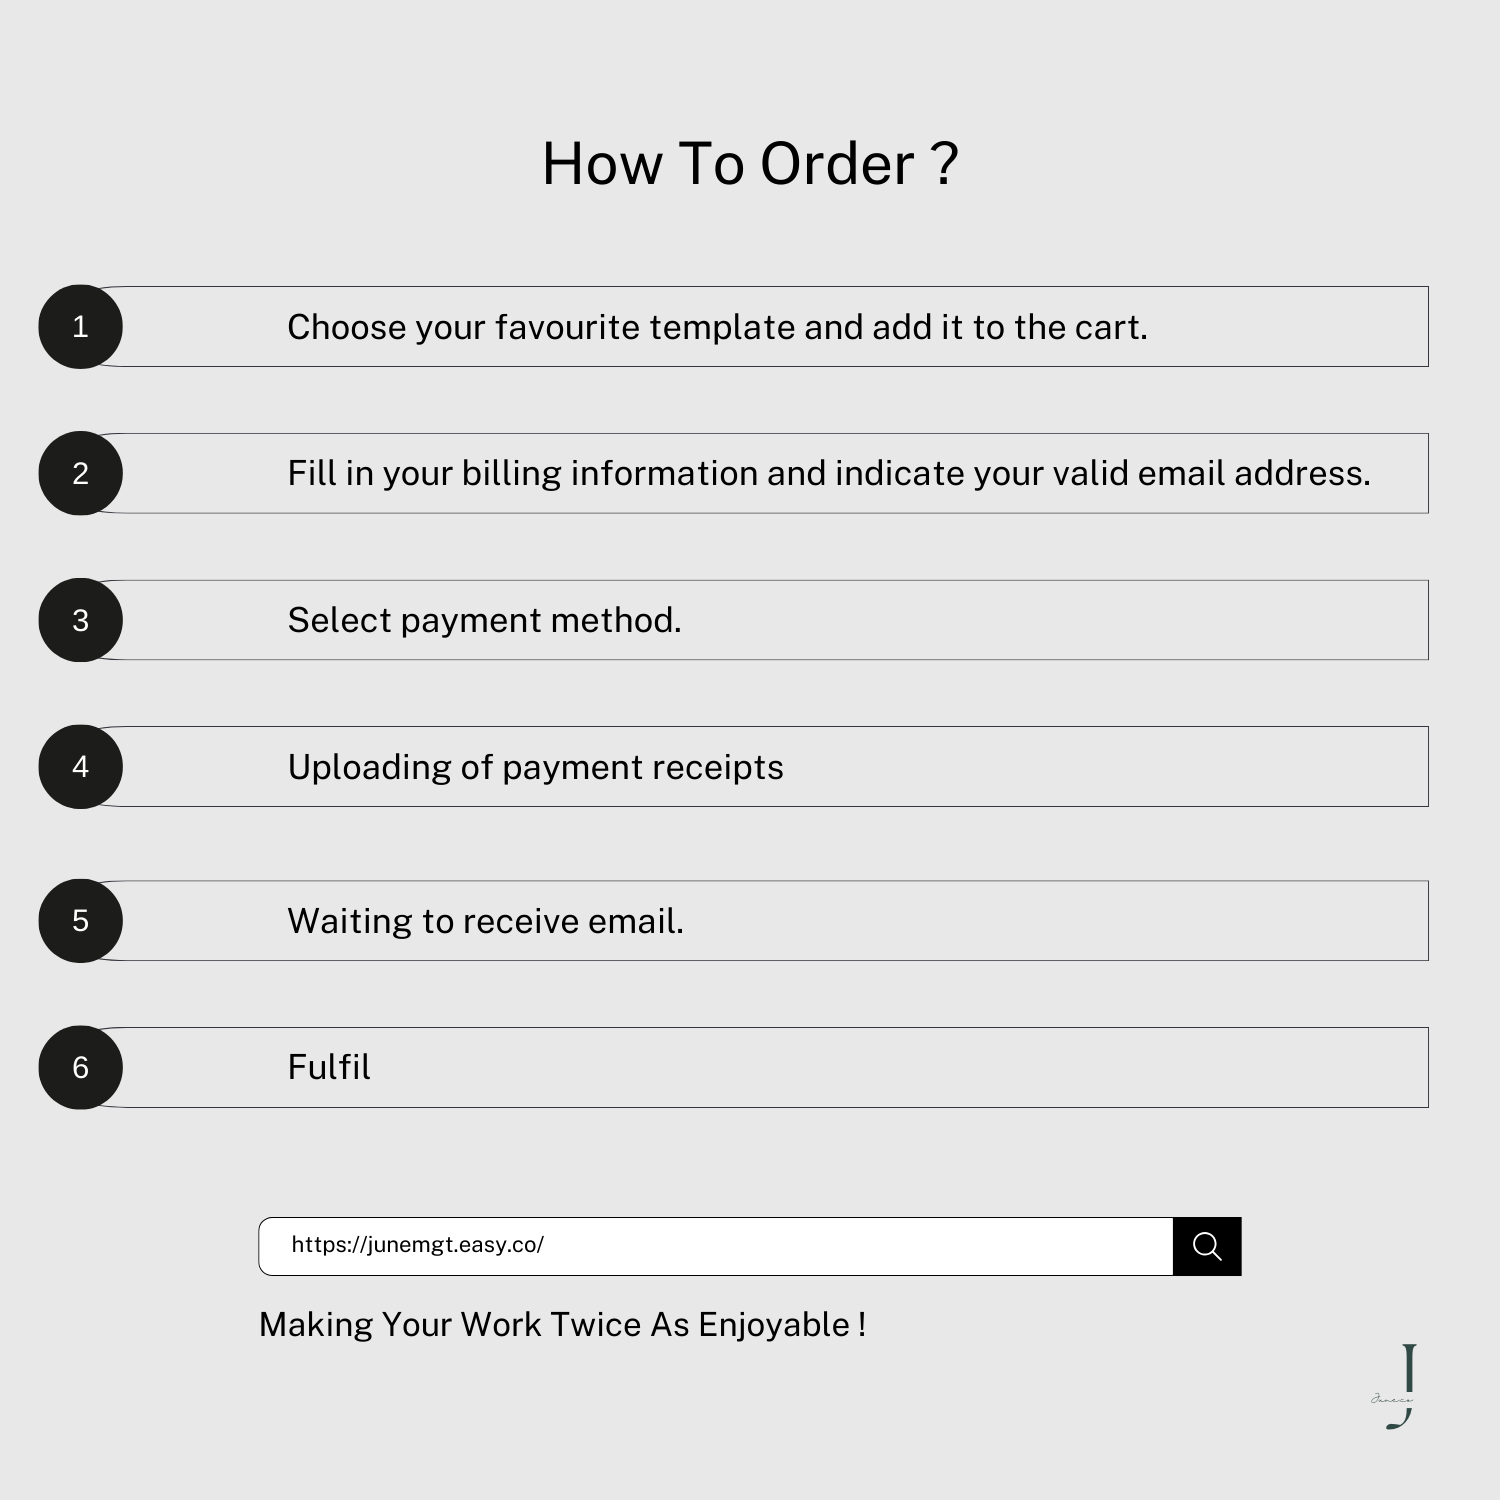 1. how to order